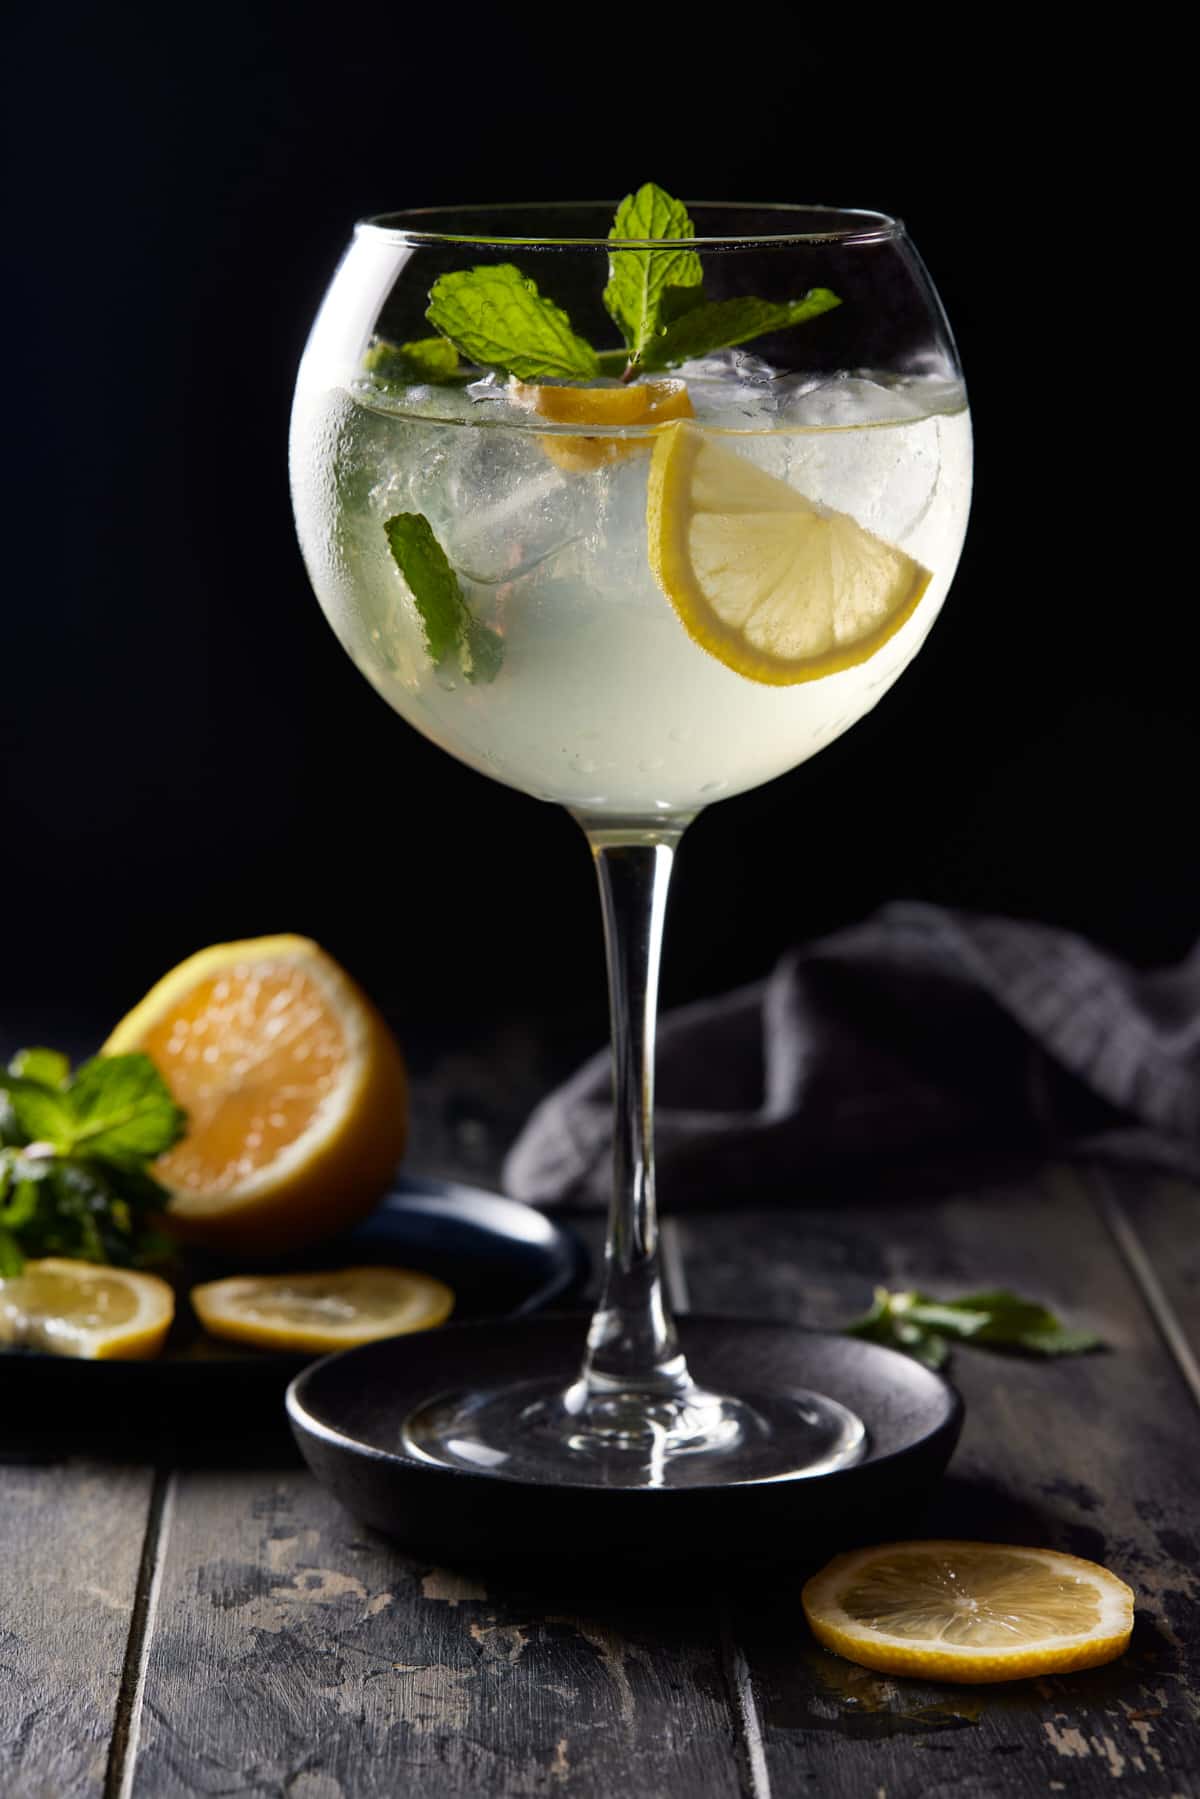 Tall wine glass filled with ice, lemon, mint and bubbly hugo spritz drink. 